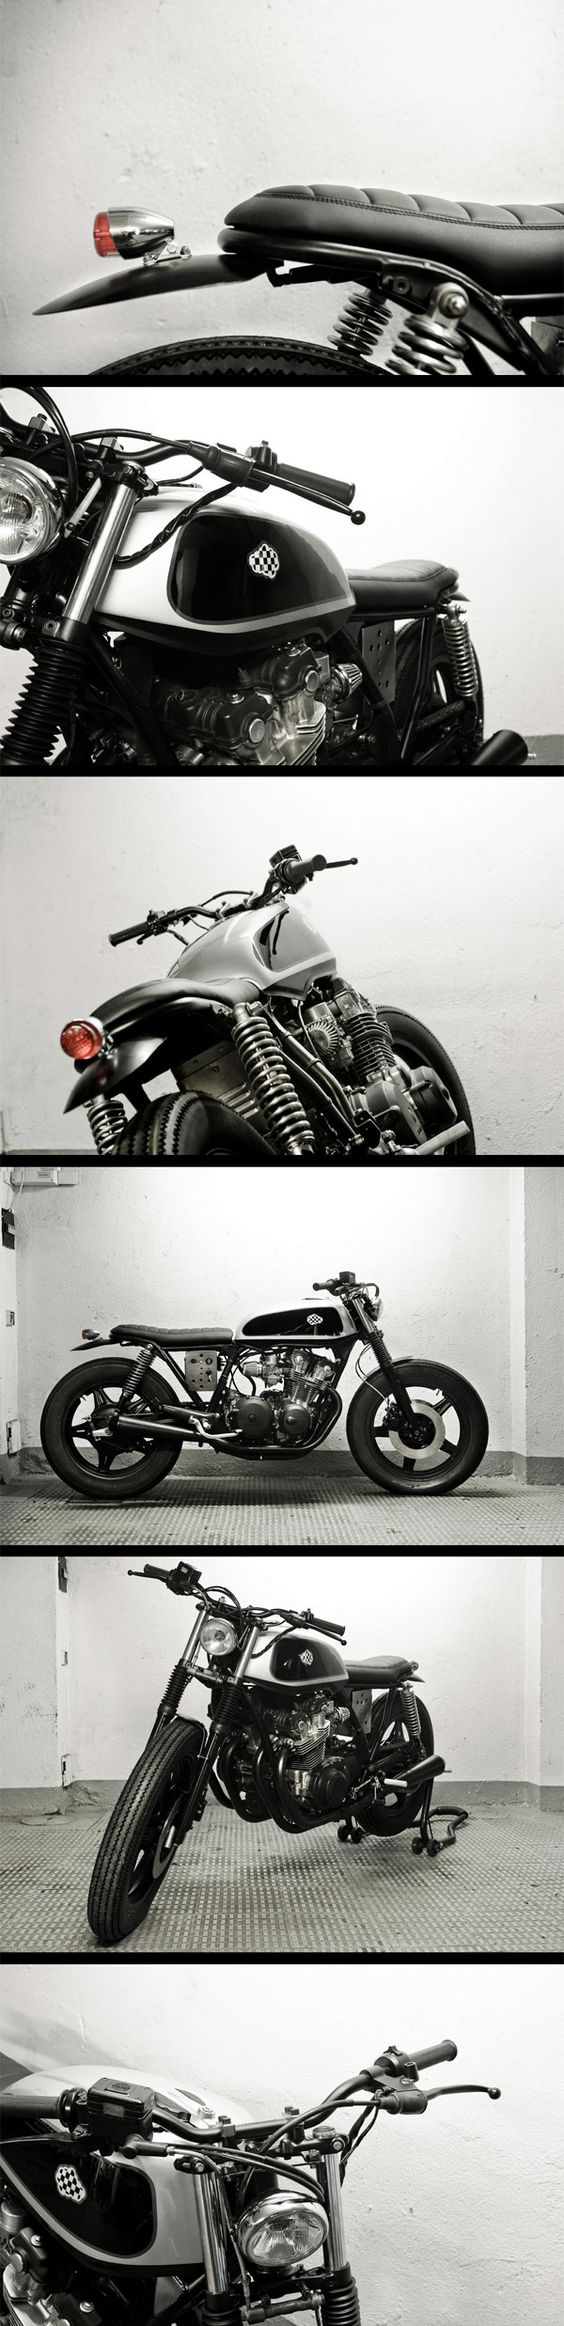 Cafe Racer Dreams : Honda CB 750 kz 1980 bratstyle. CLICK the PICTURE or check out my BLOG for more: 